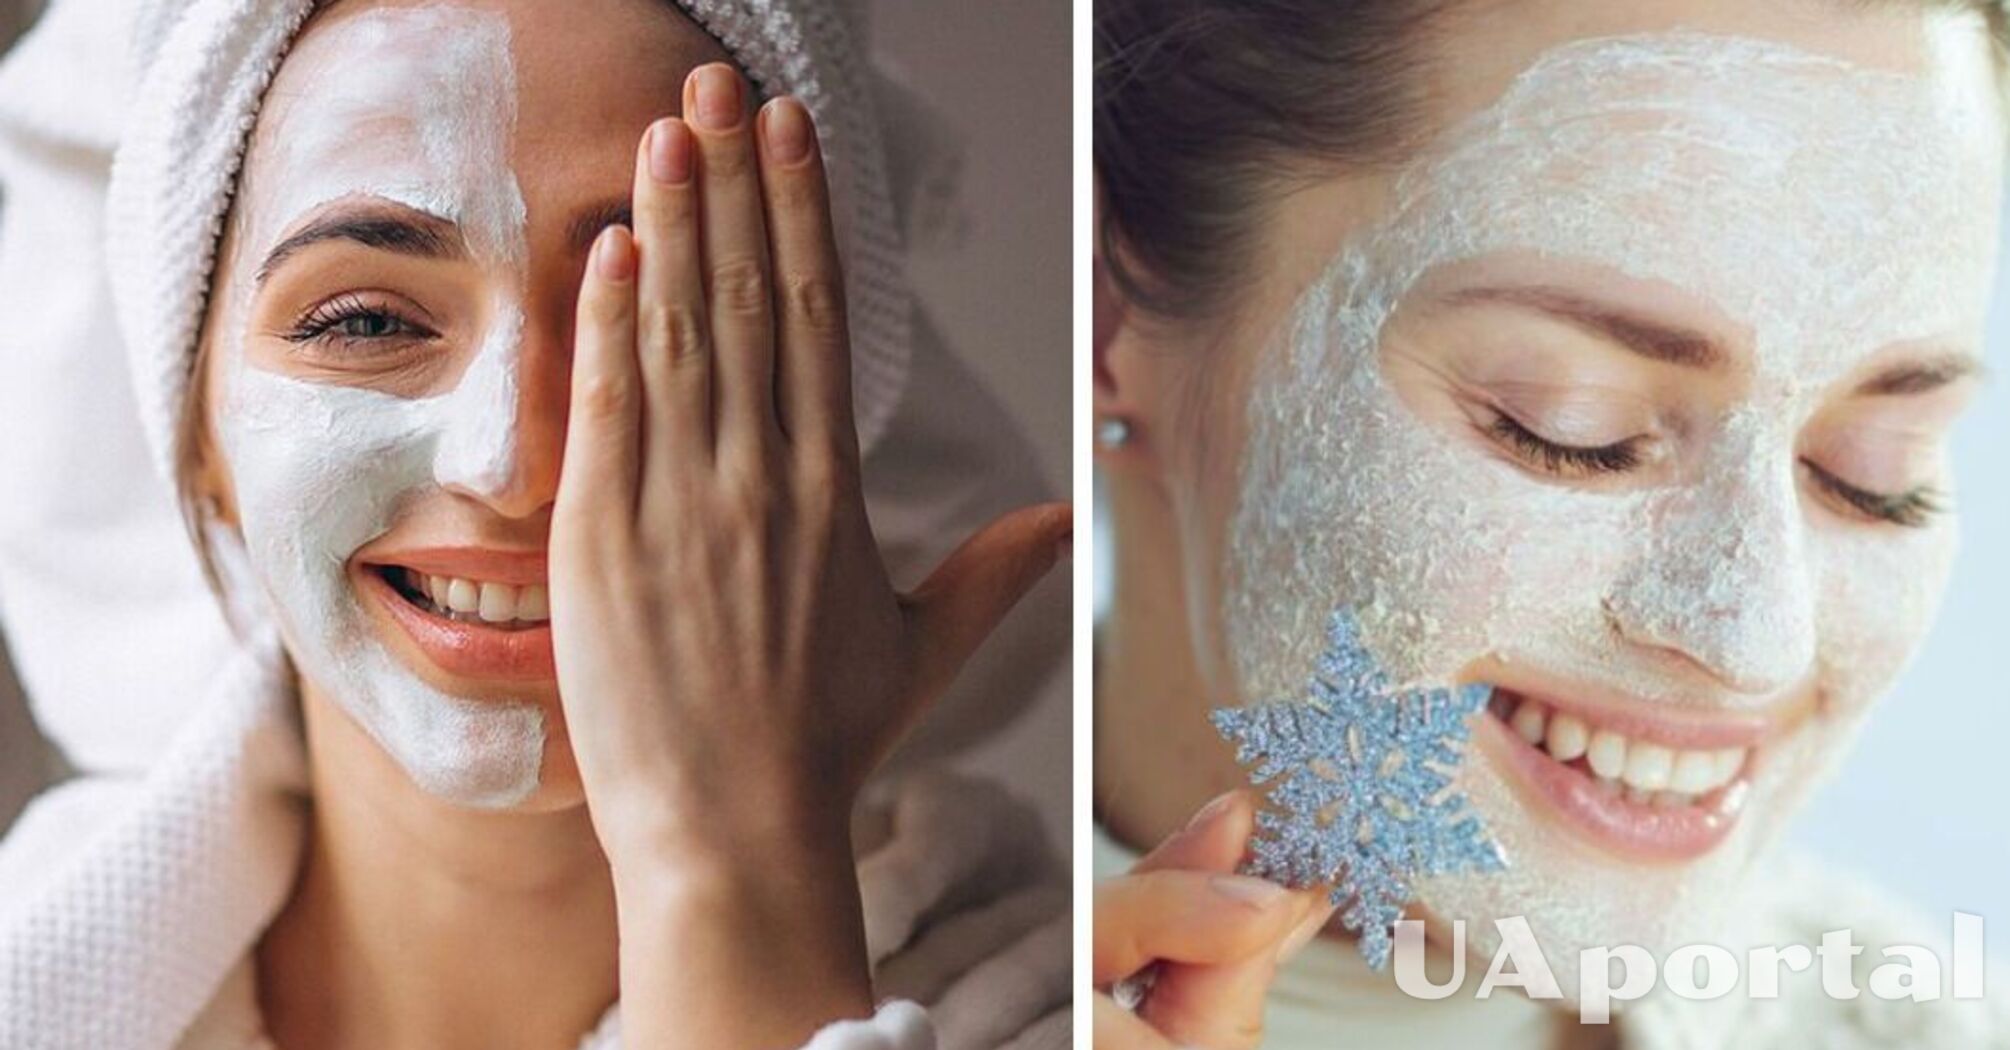 Don't forget about moisturizing: how to take care of your skin in winter